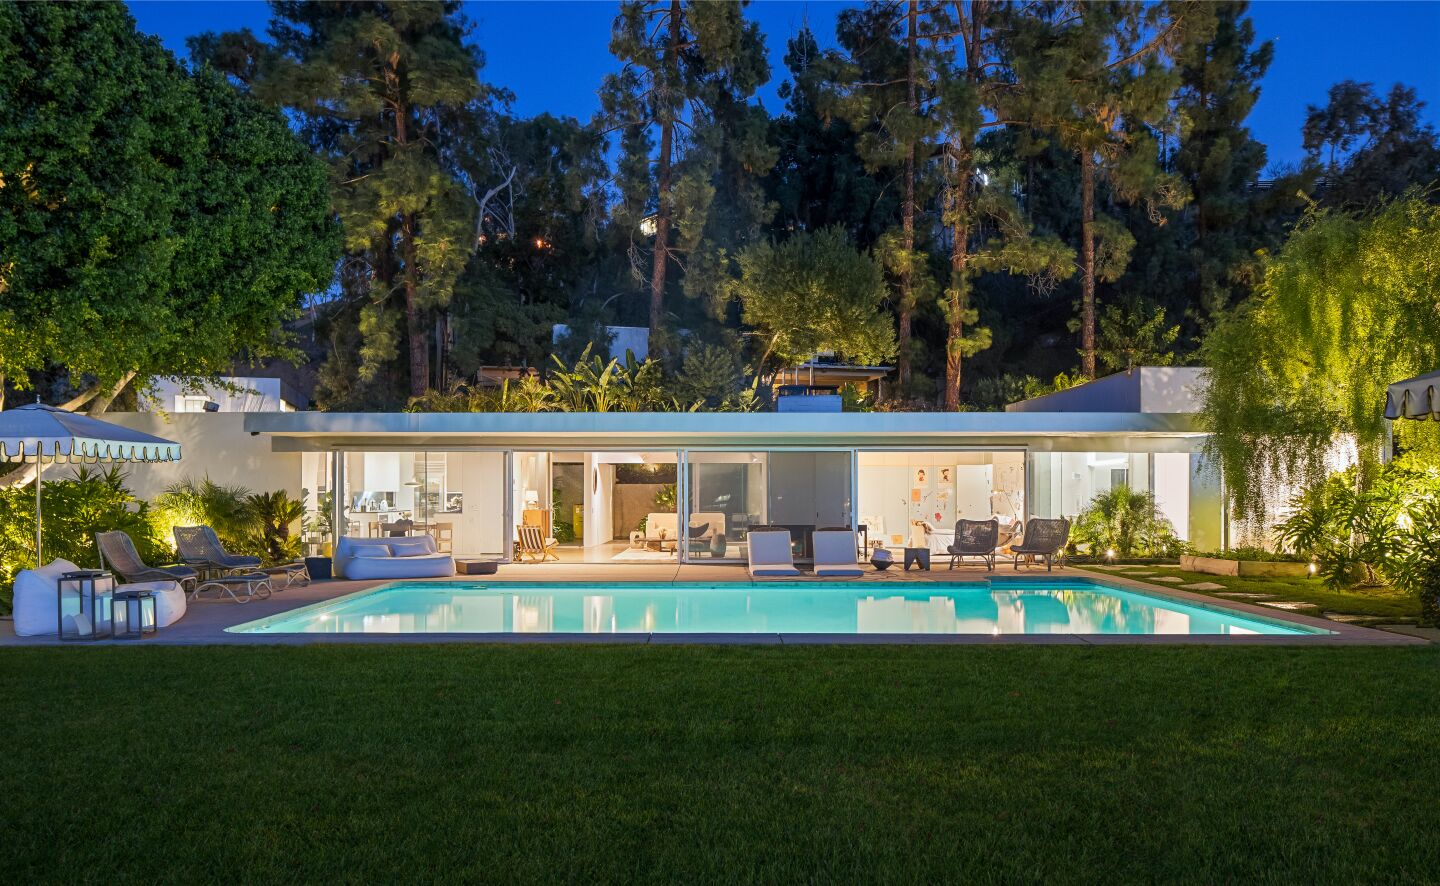 Built in 1958 for choreographer Eugene Loring, the boxcar-style home comes with a detached guesthouse built by Steven Ehrlich.